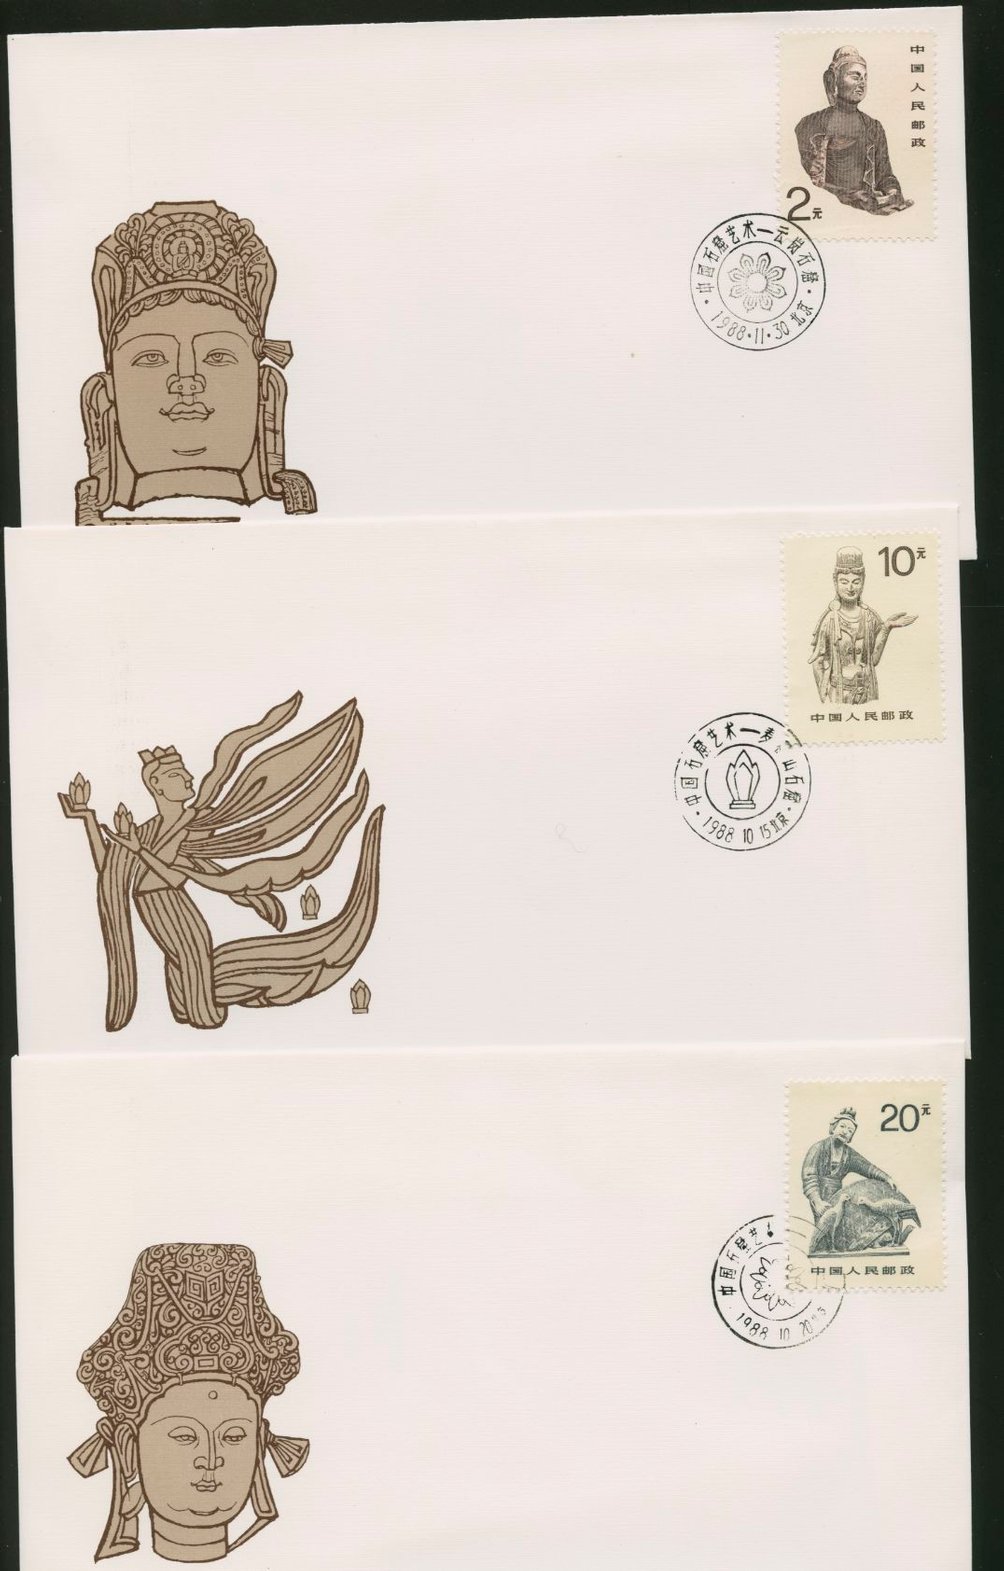 1988 First Day Covers franked with 2189 and 2191-92 from PRC R24 (they were all issued on different dates)